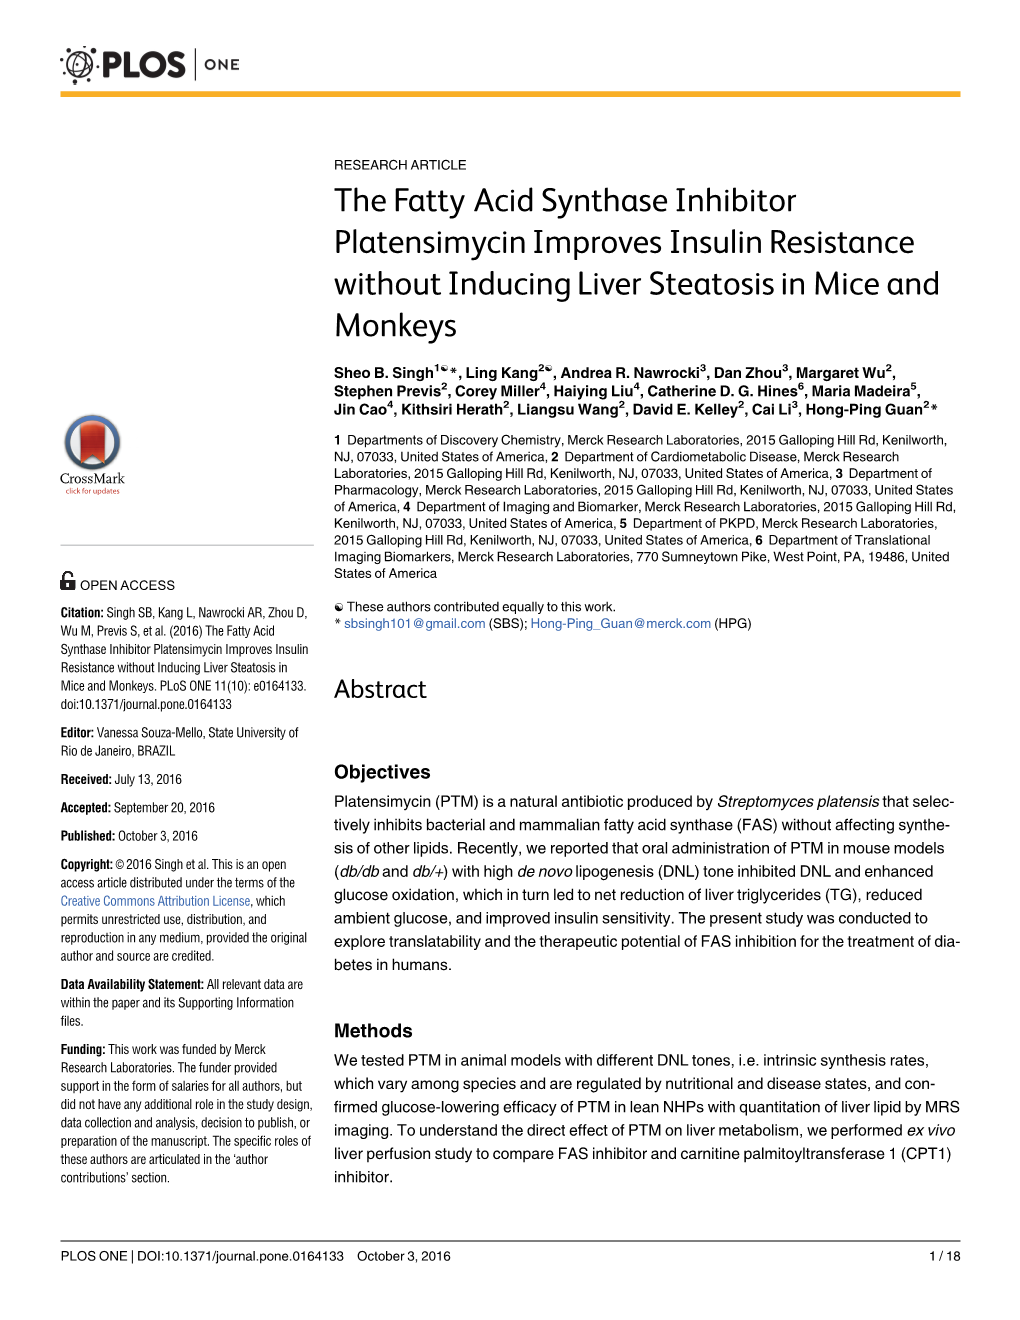 The Fatty Acid Synthase Inhibitor Platensimycin Improves Insulin Resistance Without Inducing Liver Steatosis in Mice and Monkeys